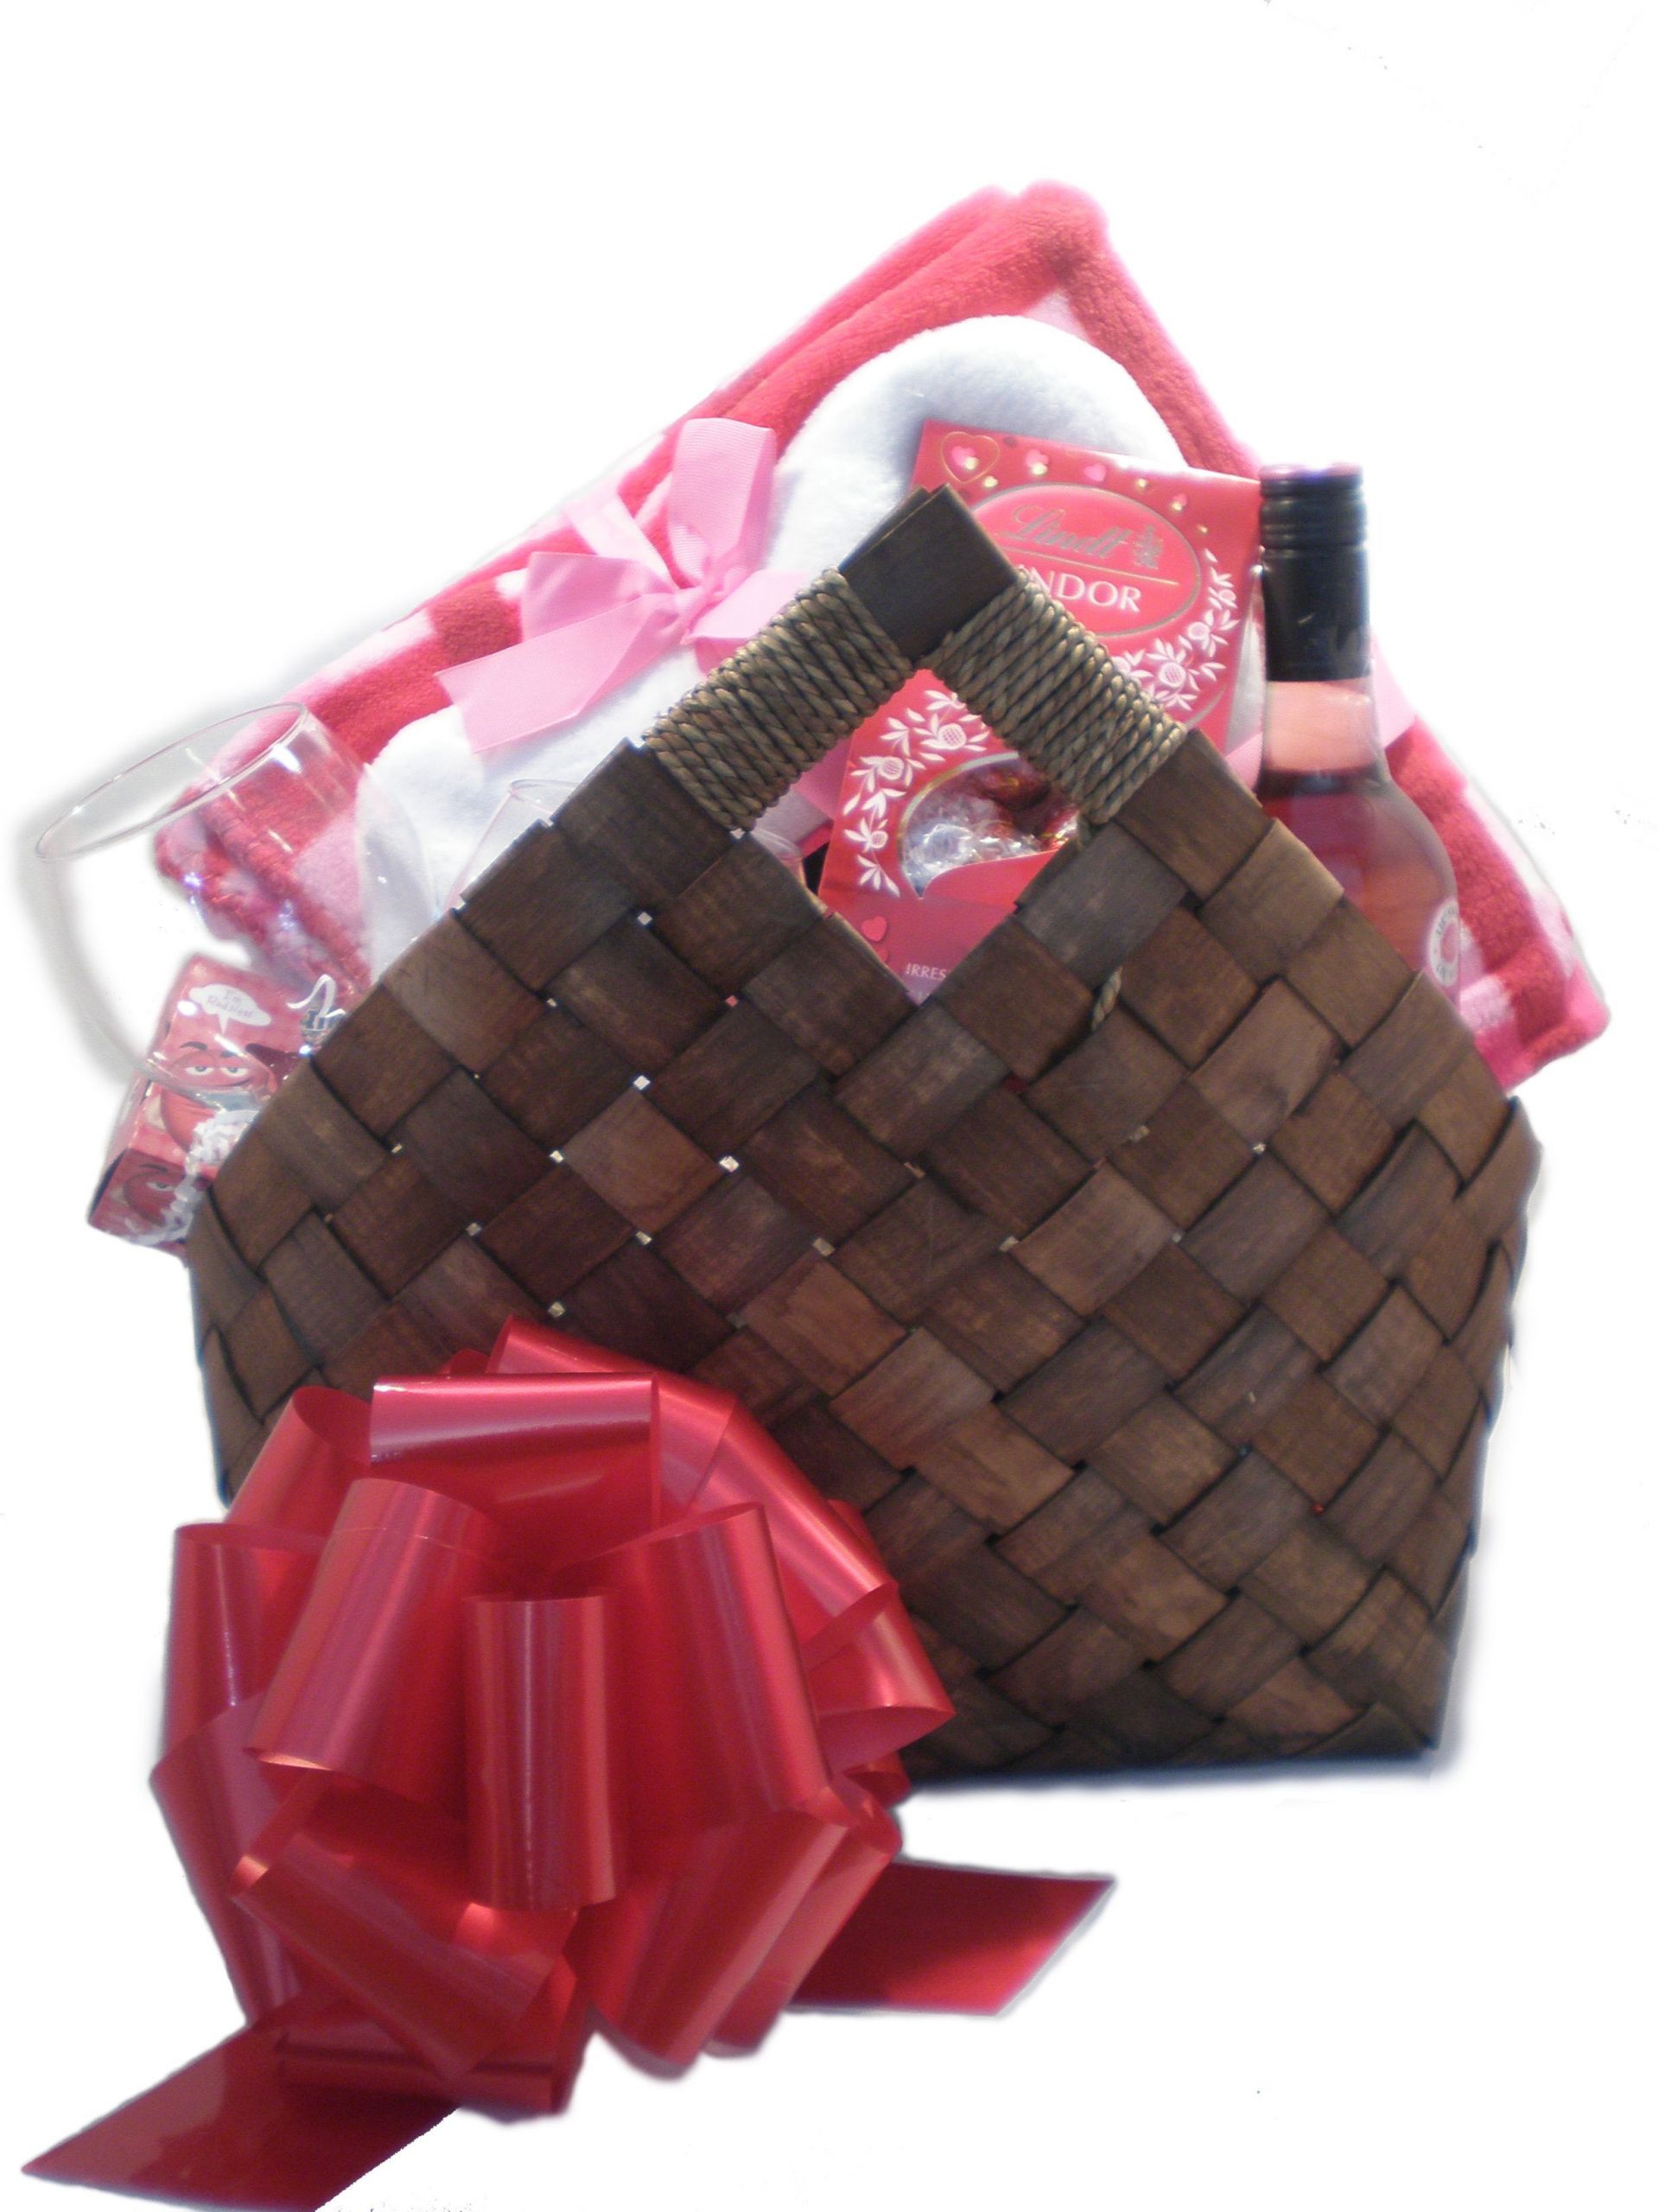 Warm And Cozy Gift Basket Ideas
 Our "Warm and Cozy" t basket is so versatile because it